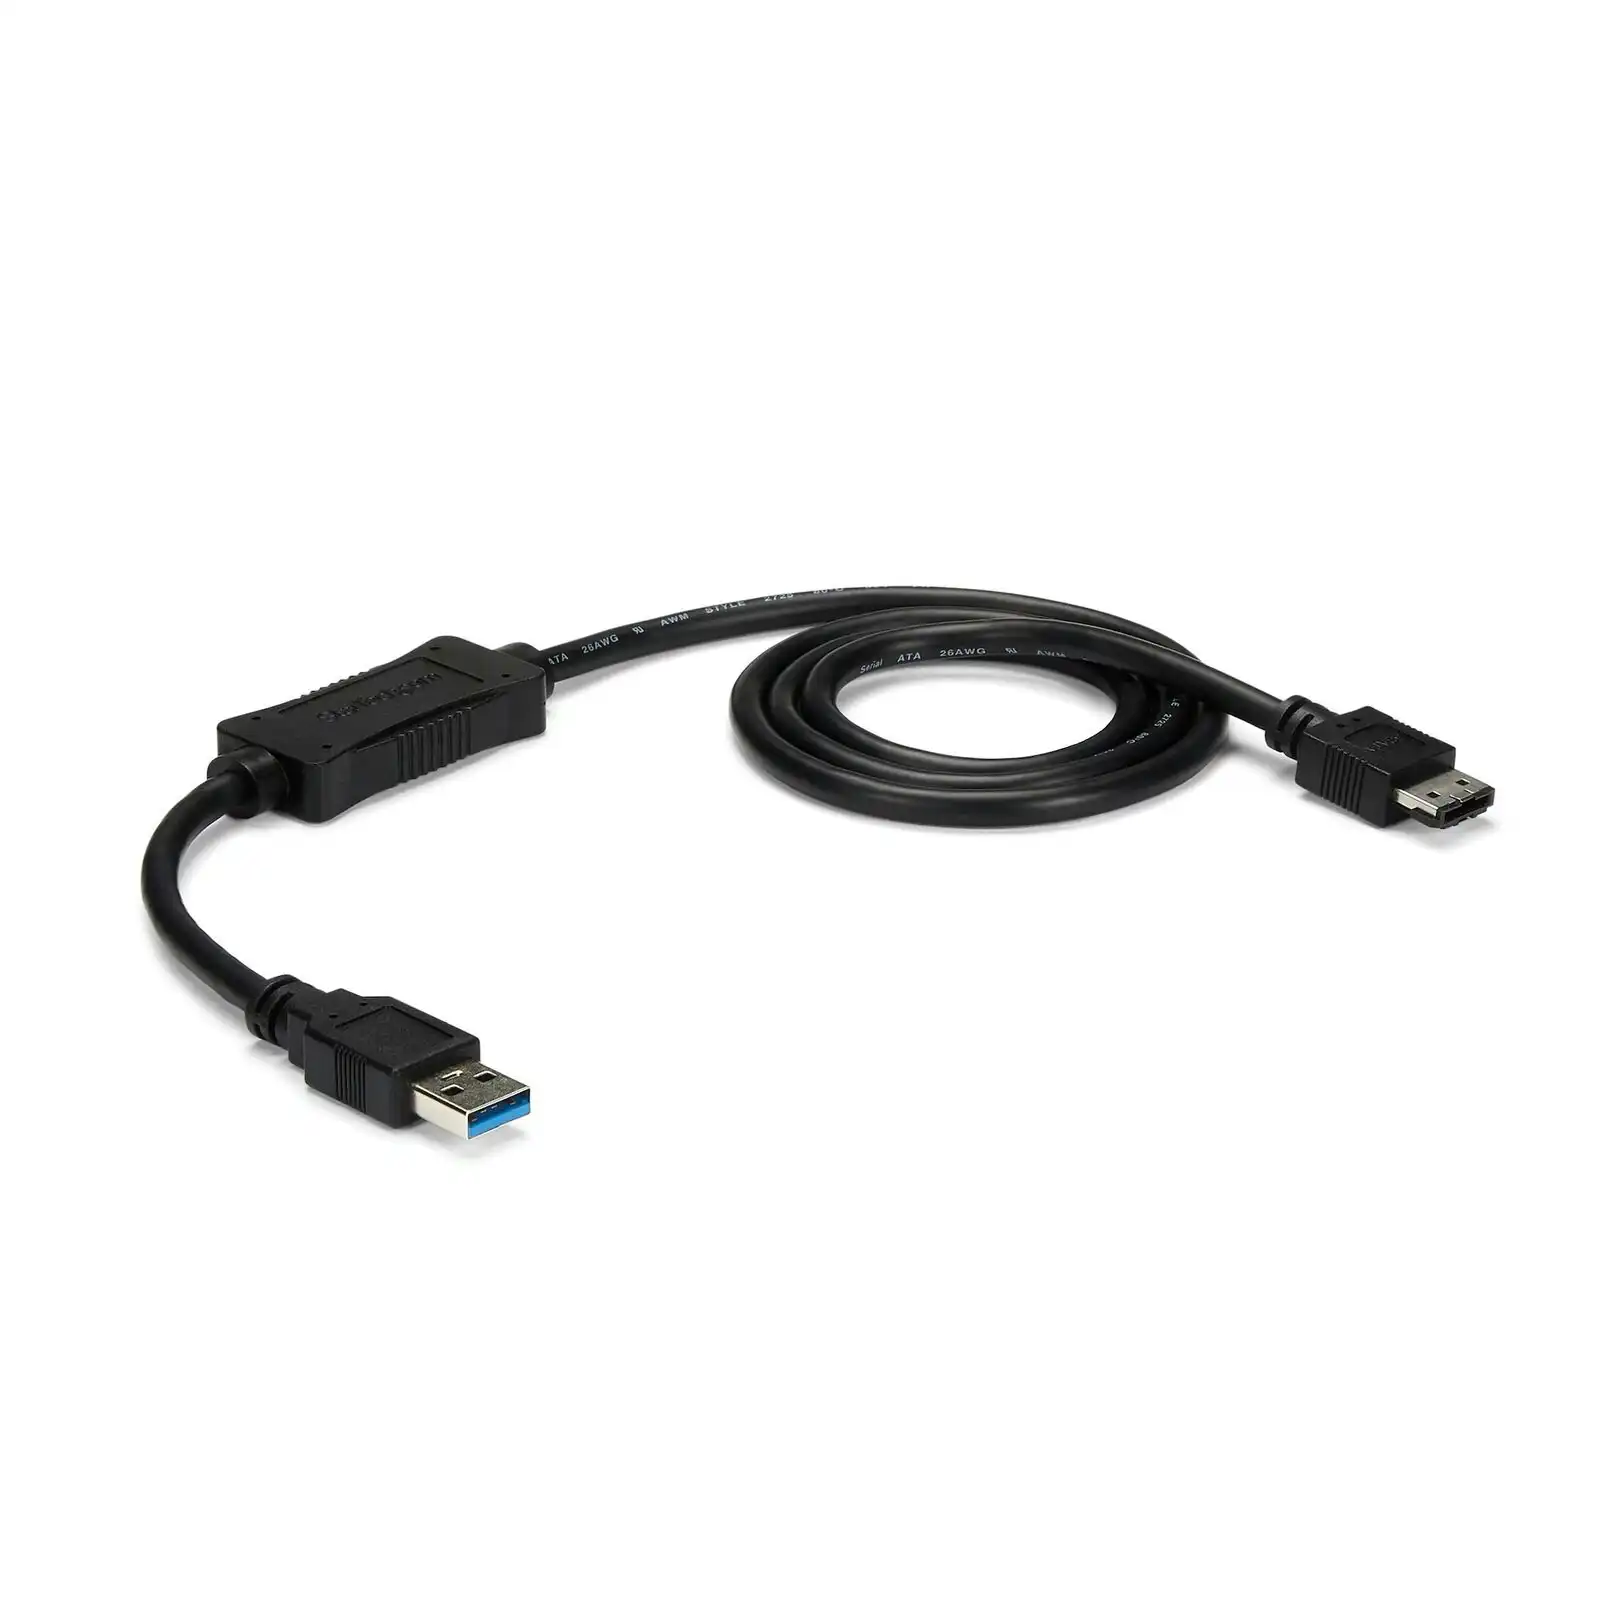 Star Tech 6Gbps USB 3.0 to eSATA Adapter 3ft Cable for SSD/HDD/ODD Stroage Drive